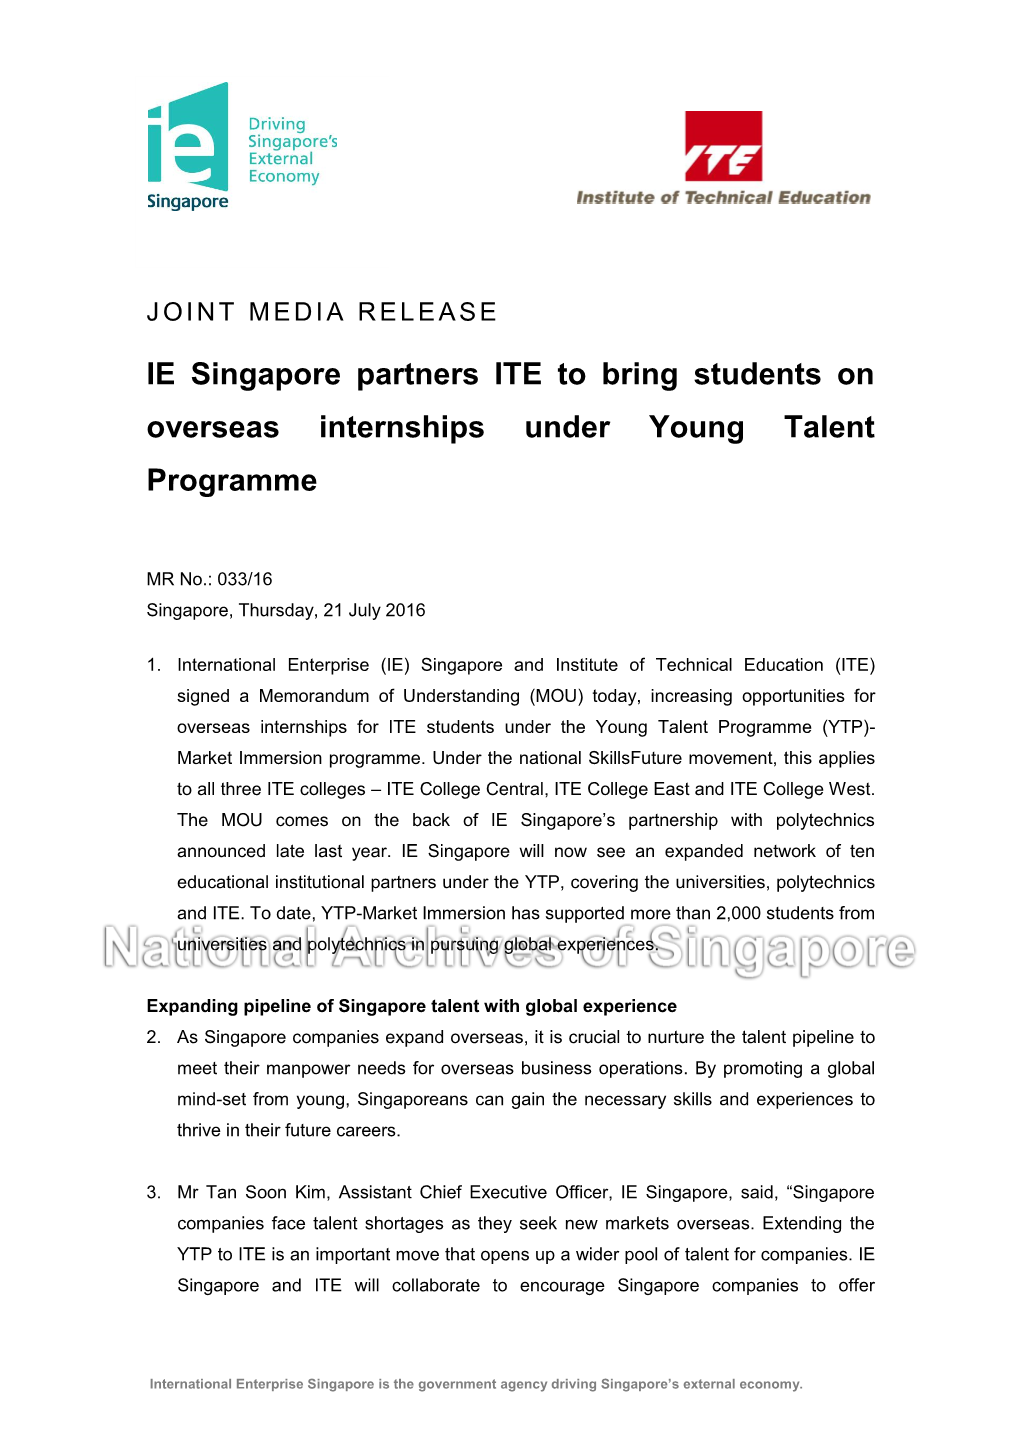 IE Singapore Partners ITE to Bring Students on Overseas Internships Under Young Talent Programme